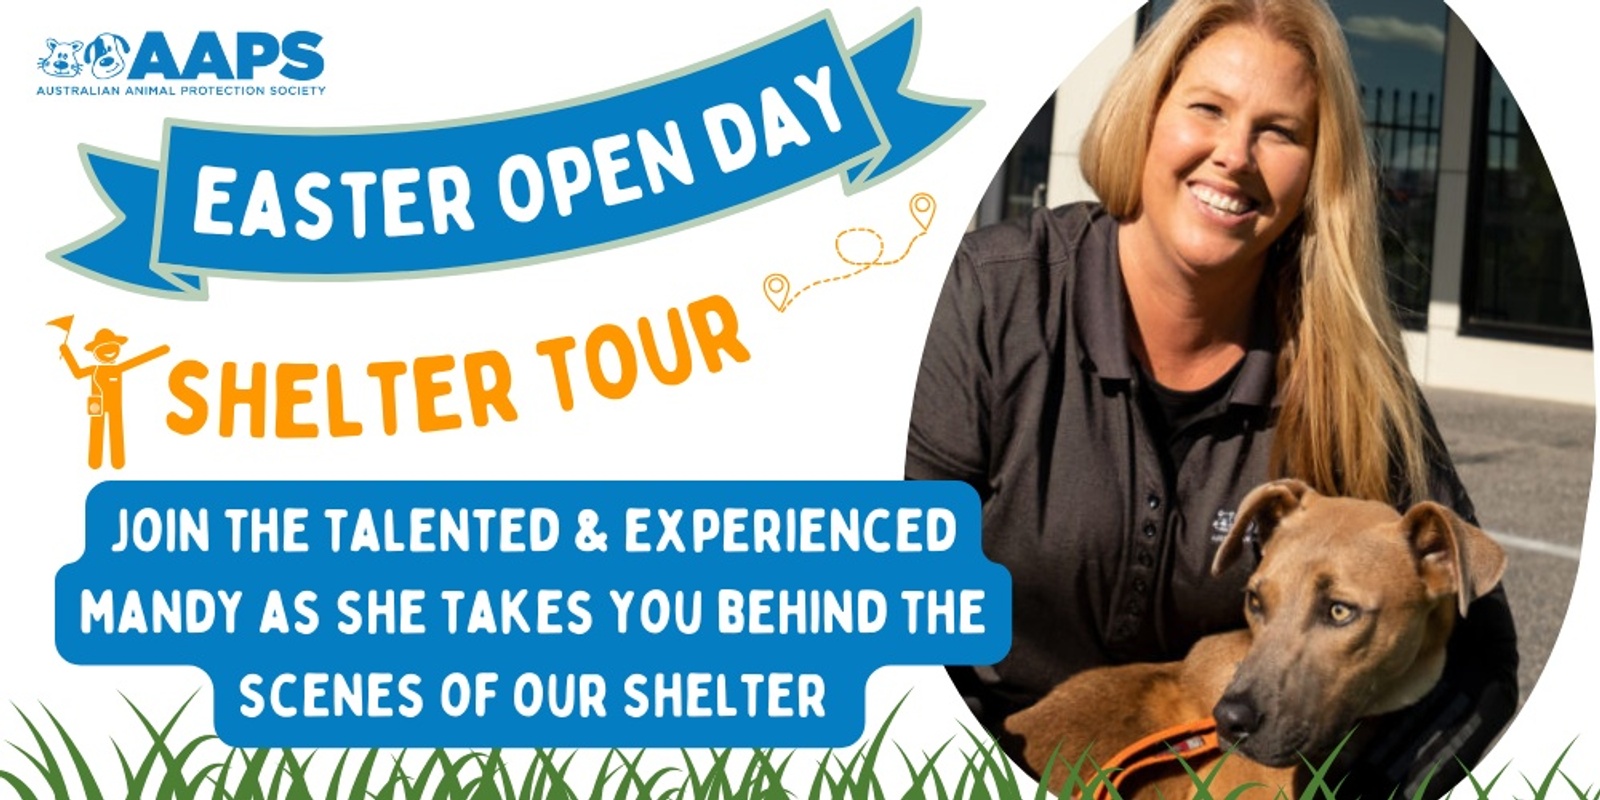 Banner image for AAPS Easter Open Day Shelter Tour